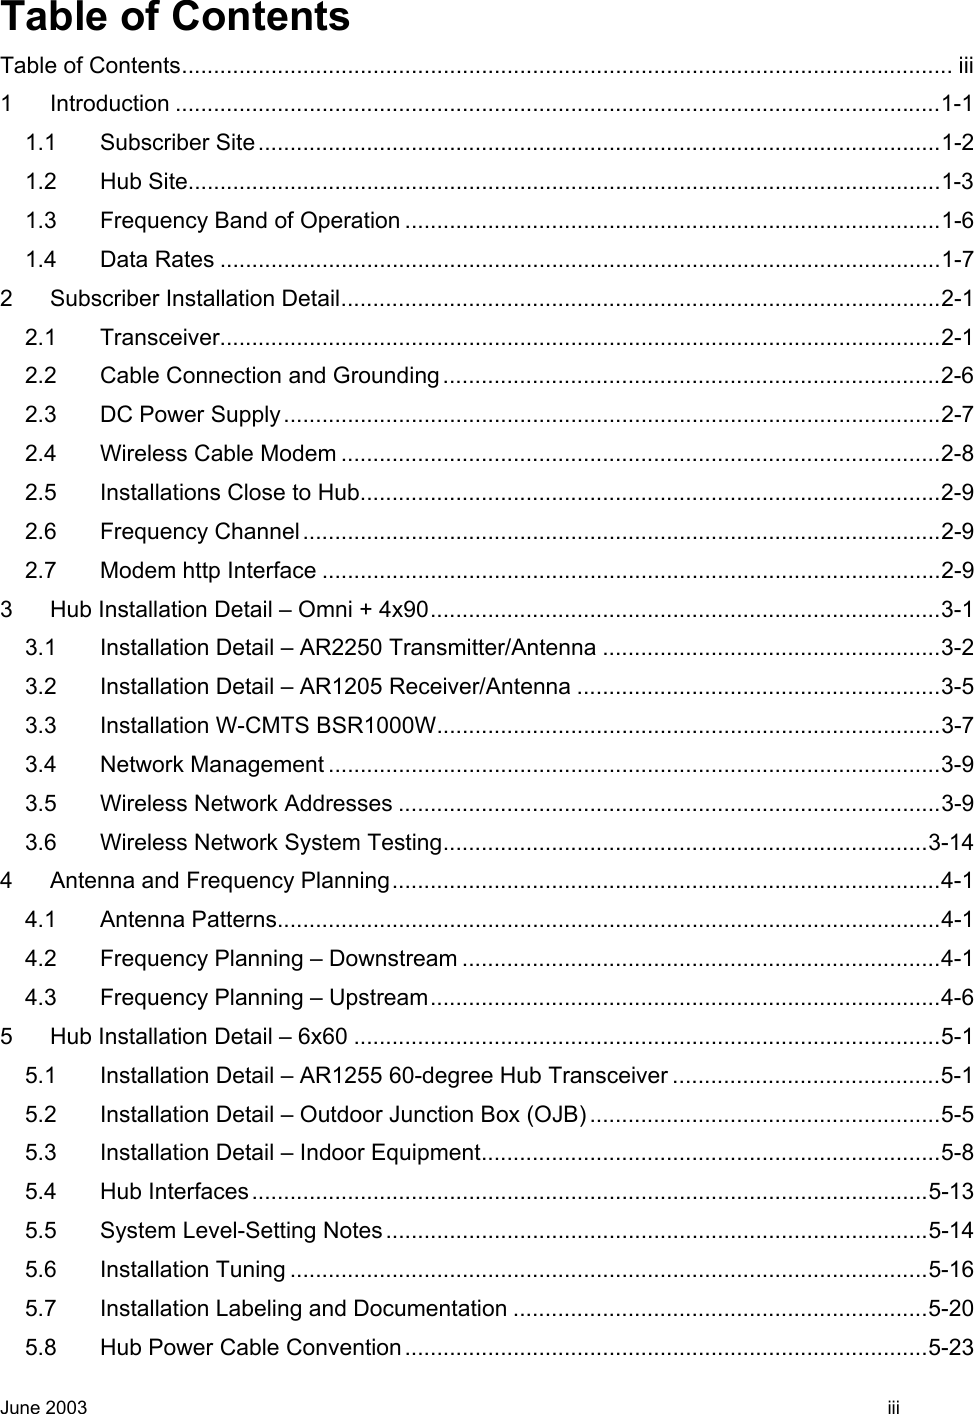  Table of Contents Table of Contents......................................................................................................................... iii 1 Introduction ........................................................................................................................1-1 1.1 Subscriber Site...........................................................................................................1-2 1.2 Hub Site......................................................................................................................1-3 1.3 Frequency Band of Operation ....................................................................................1-6 1.4 Data Rates .................................................................................................................1-7 2 Subscriber Installation Detail..............................................................................................2-1 2.1 Transceiver.................................................................................................................2-1 2.2 Cable Connection and Grounding..............................................................................2-6 2.3 DC Power Supply.......................................................................................................2-7 2.4 Wireless Cable Modem ..............................................................................................2-8 2.5 Installations Close to Hub...........................................................................................2-9 2.6 Frequency Channel....................................................................................................2-9 2.7 Modem http Interface .................................................................................................2-9 3 Hub Installation Detail – Omni + 4x90................................................................................3-1 3.1 Installation Detail – AR2250 Transmitter/Antenna .....................................................3-2 3.2 Installation Detail – AR1205 Receiver/Antenna .........................................................3-5 3.3 Installation W-CMTS BSR1000W...............................................................................3-7 3.4 Network Management ................................................................................................3-9 3.5 Wireless Network Addresses .....................................................................................3-9 3.6 Wireless Network System Testing............................................................................3-14 4 Antenna and Frequency Planning......................................................................................4-1 4.1 Antenna Patterns........................................................................................................4-1 4.2 Frequency Planning – Downstream ...........................................................................4-1 4.3 Frequency Planning – Upstream................................................................................4-6 5 Hub Installation Detail – 6x60 ............................................................................................5-1 5.1 Installation Detail – AR1255 60-degree Hub Transceiver ..........................................5-1 5.2 Installation Detail – Outdoor Junction Box (OJB) .......................................................5-5 5.3 Installation Detail – Indoor Equipment........................................................................5-8 5.4 Hub Interfaces..........................................................................................................5-13 5.5 System Level-Setting Notes.....................................................................................5-14 5.6 Installation Tuning ....................................................................................................5-16 5.7 Installation Labeling and Documentation .................................................................5-20 5.8 Hub Power Cable Convention..................................................................................5-23 June 2003    iii 